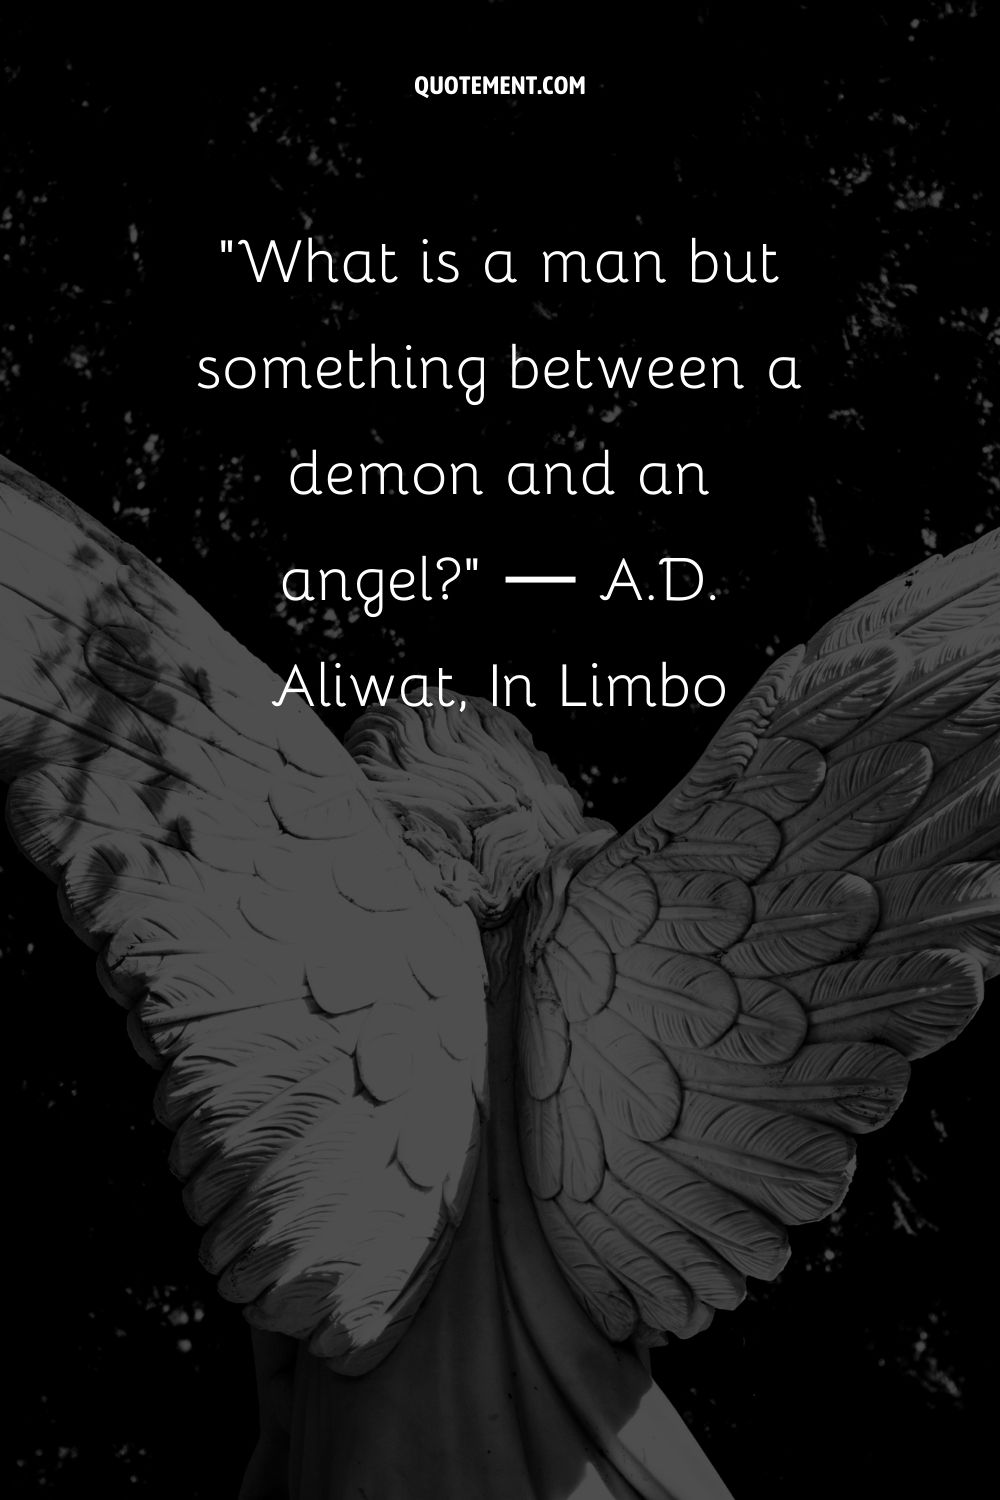 What is a man but something between a demon and an angel